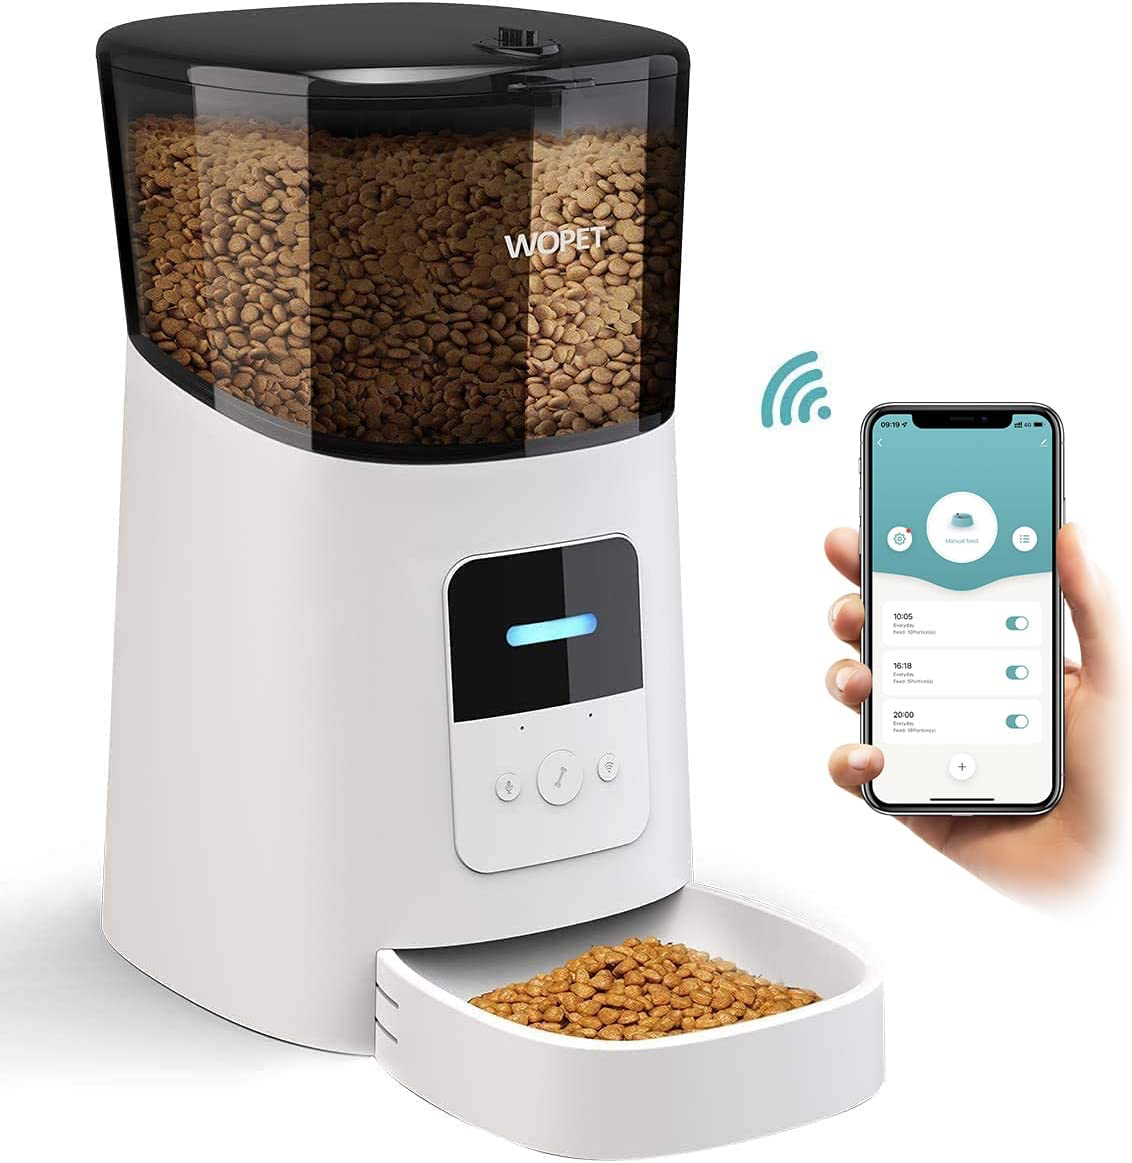 The WOpet Smart Pet Feeder for Dogs and Cats